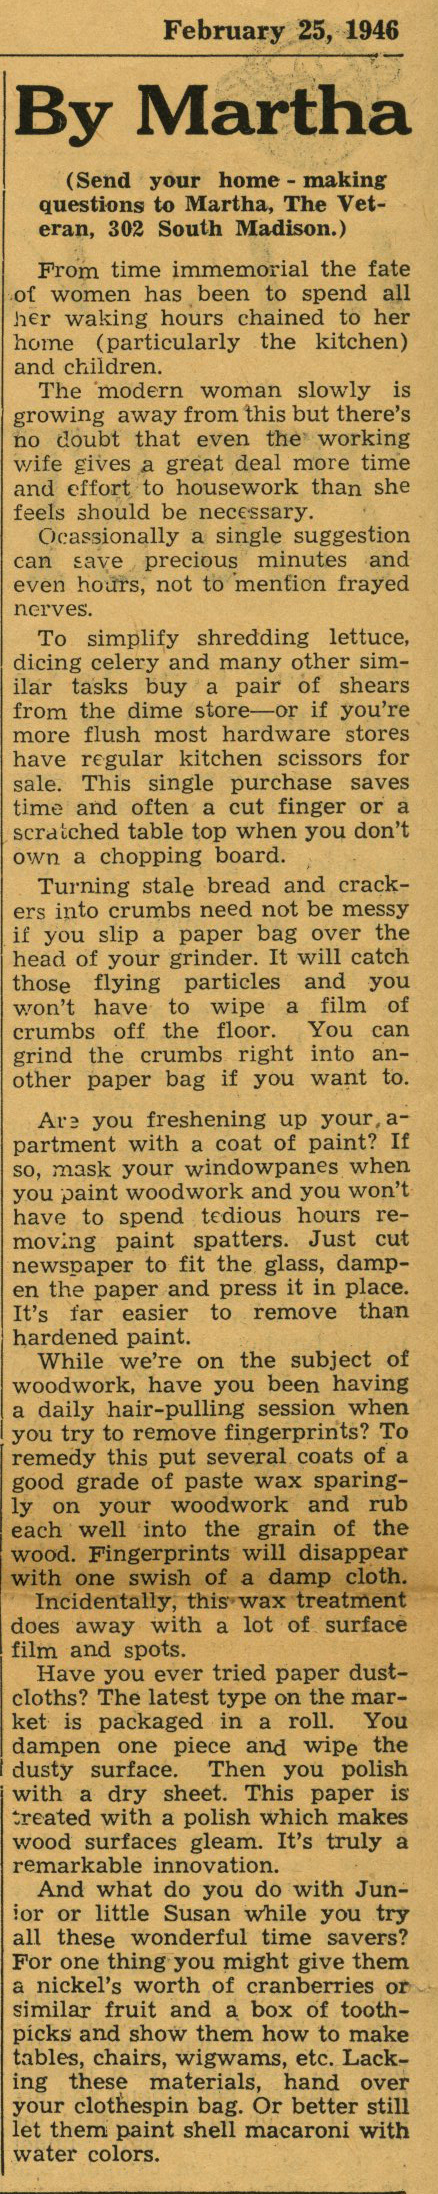 Newspaper clipping with the following text: February 25, 1946 By Martha (Send your home - making questions to Martha, The Vet­eran, 302 South Madison.) From time immemorial the fate of women has been to spend all her waking hours chained to her home (particularly the kitchen) and children. The modern woman slowly is growing away from this but there's no doubt that even the working wife gives a great deal more time and effort to housework than she feels should be necessary. Occasionally a single suggestion can save precious minutes and even hours, not to mention frayed nerves. To simplify shredding lettuce, dicing celery and many other sim­ilar tasks buy a pair of shears from the dime store-or if you're more flush most hardware stores have regular kitchen scissors for sale. This single purchase saves time and often a cut finger or a scrc1tched table top when you don't own a chopping board. Turning stale bread and crack­ers into crumbs need not be messy if you slip a paper bag over the head of your grinder. It will catch those flying particles and you won't have to wipe a film of crumbs off the floor. You can grind the crumbs right into an­other paper bag if you want to. Are you freshening up your apartment with a coat of paint? If so, mask your windowpanes when you paint woodwork and you won't have to spend tedious hours removing paint spatters. Just cut newspaper to fit the glass, damp­en the paper and press it in place. It's far easier to remove than hardened paint. While we're on the subject of woodwork, have you been having a daily hair-pulling session when you try to remove fingerprints? To remedy this put several coats of a good grade of paste wax sparing­ly on your woodwork and rub each well into the grain of the wood. Fingerprints will disappear with one swish of a damp cloth. Incidentally, this wax treatment does away with a lot of surface film and spots. Have you ever tried paper dust­cloths? The latest type on the mar­ket is packaged in a roll. You dampen one piece and wipe the dusty surface. Then you polish with a dry sheet. This paper is created with a polish which makes wood surfaces gleam. It's truly a remarkable innovation. And what do you do with Junior or little Susan while you try all these wonderful time savers? For one thing you might give them a nickel's worth of cranberries or similar fruit and a box of tooth­picks and show them how to make tables, chairs, wigwams, etc. Lack­ing these materials, hand over your clothespin bag. Or better still let them paint shell macaroni with water colors.